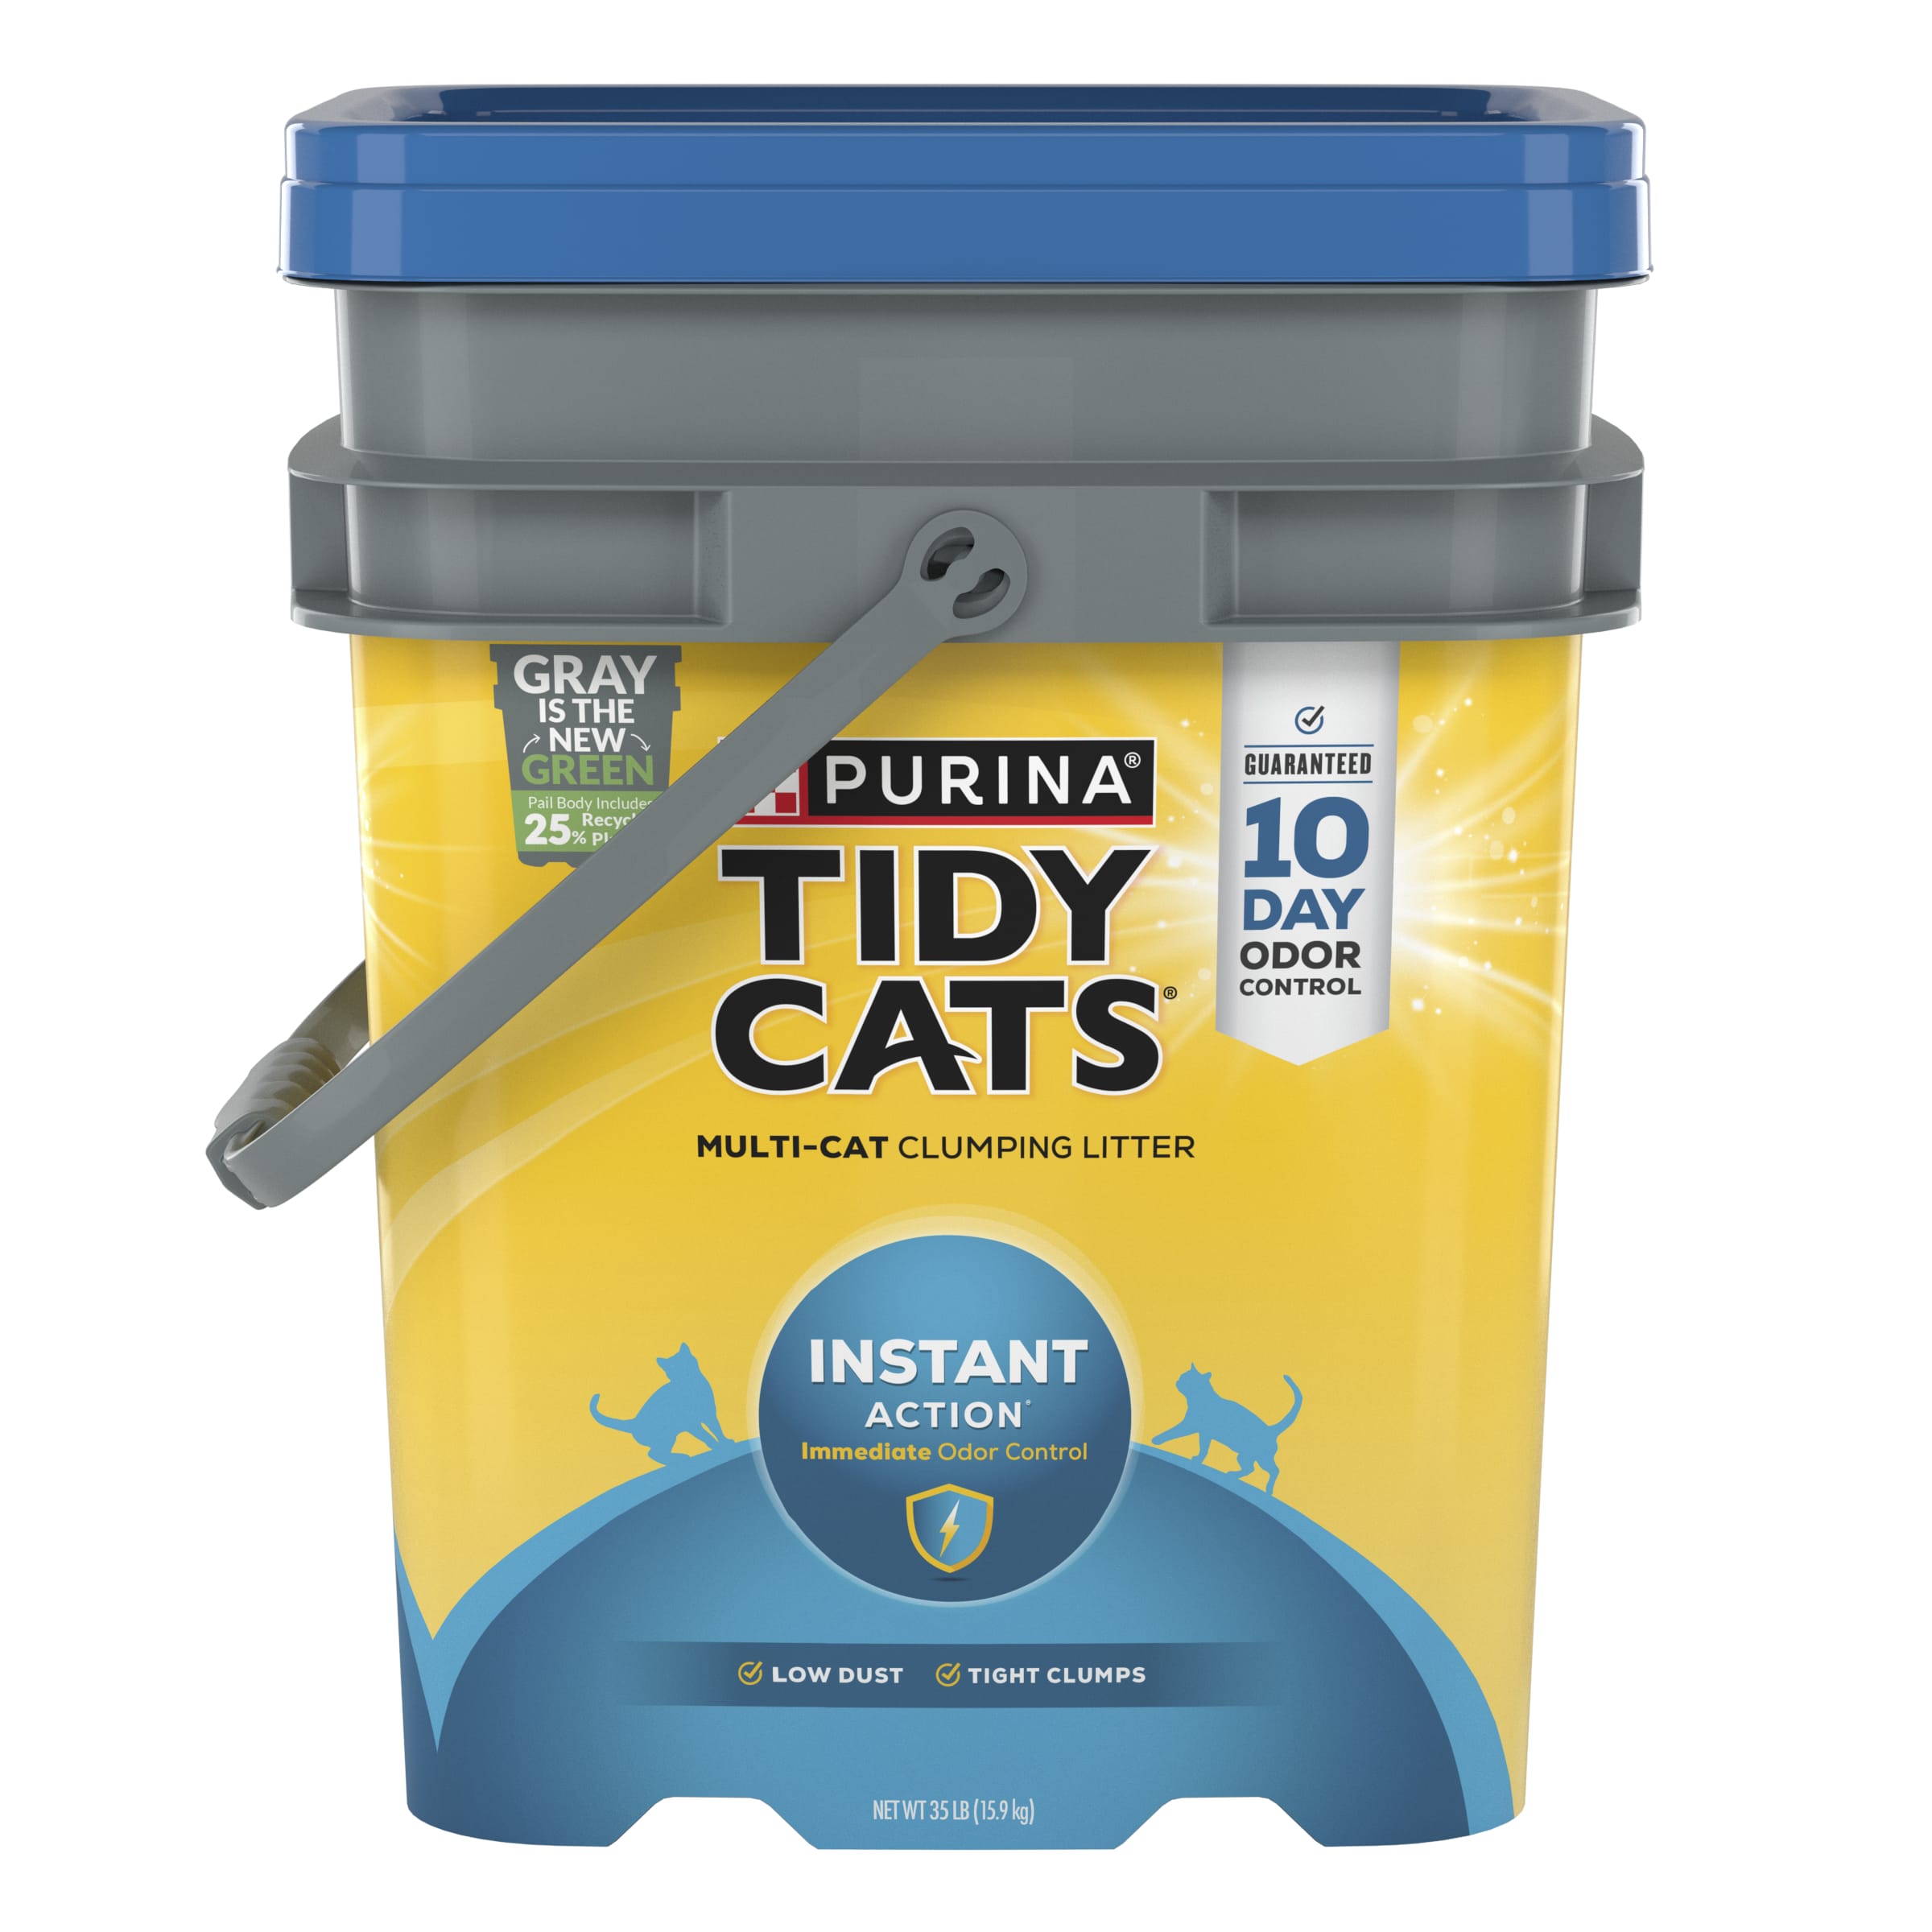 Purina Tidy Cats Multi-Cat Clumping Kitty Litter, Instant Action Deodorizing, 35 lb Jug - image 1 of 12